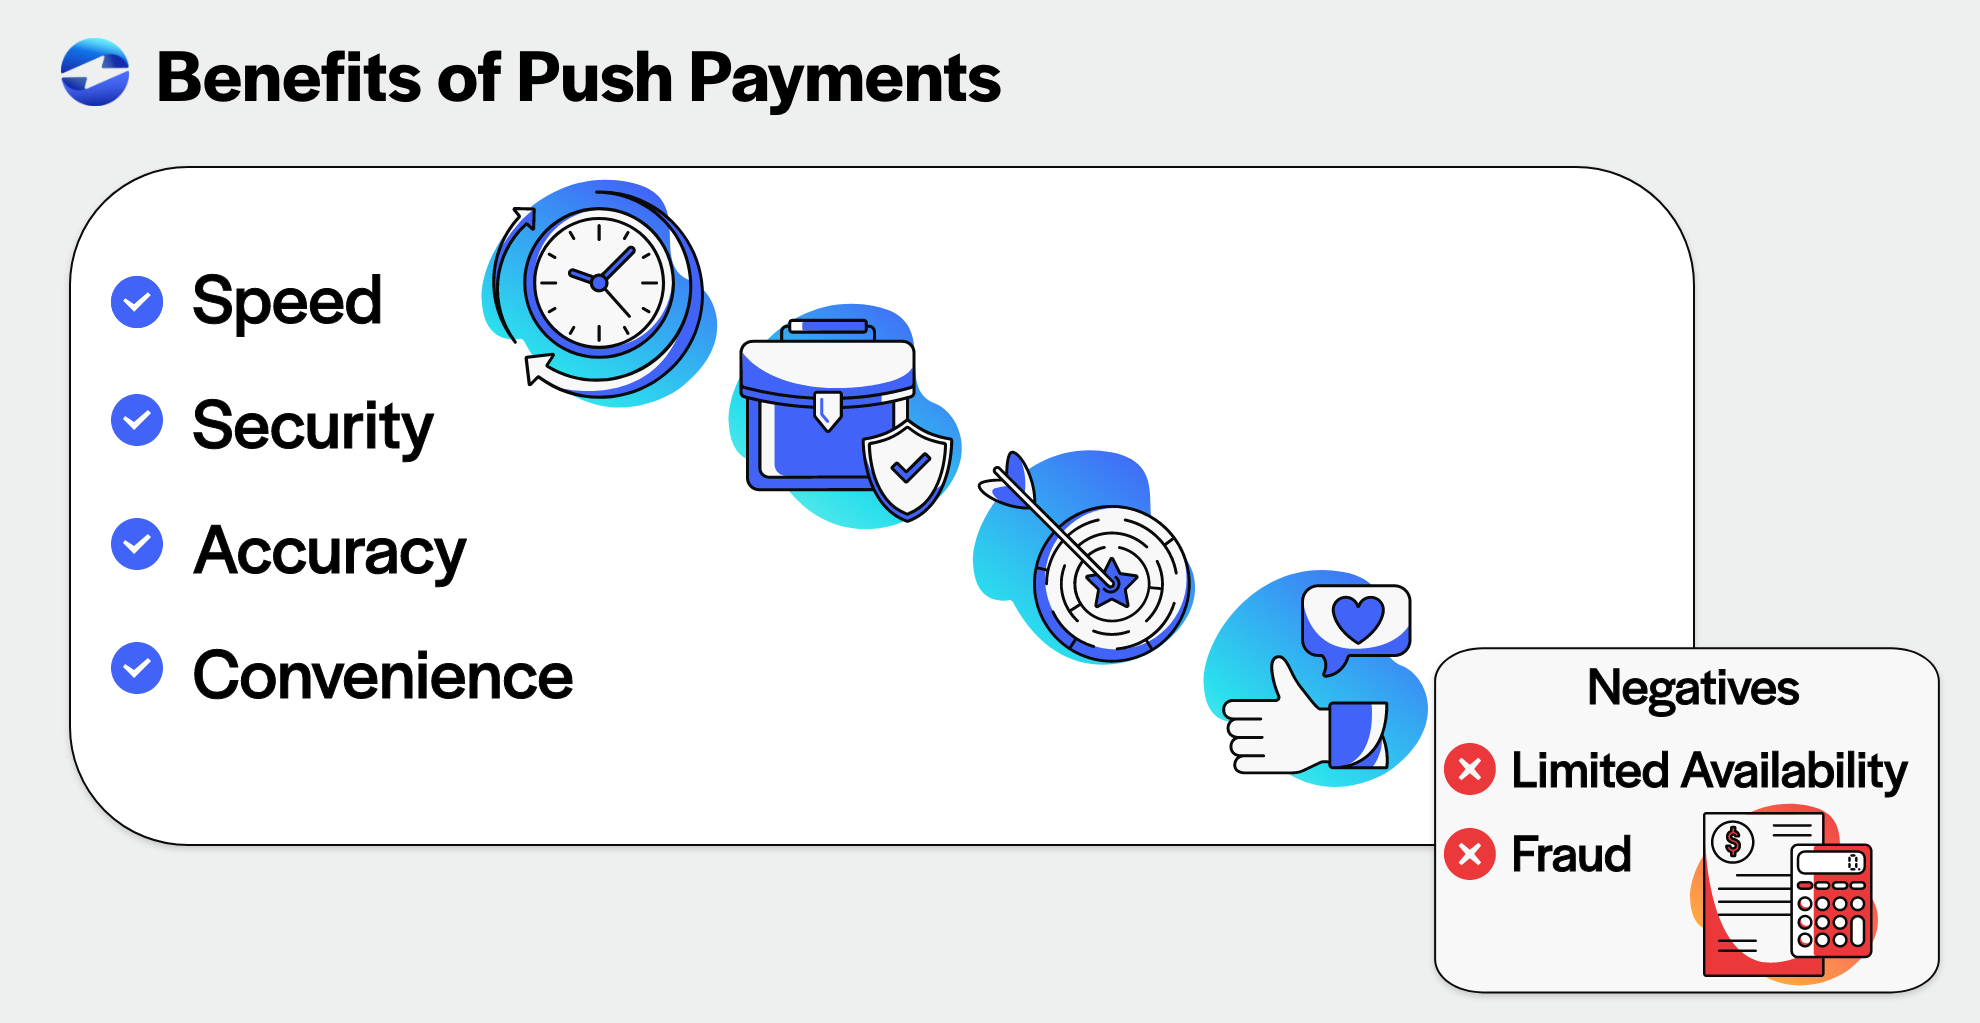 Benefits of push payments